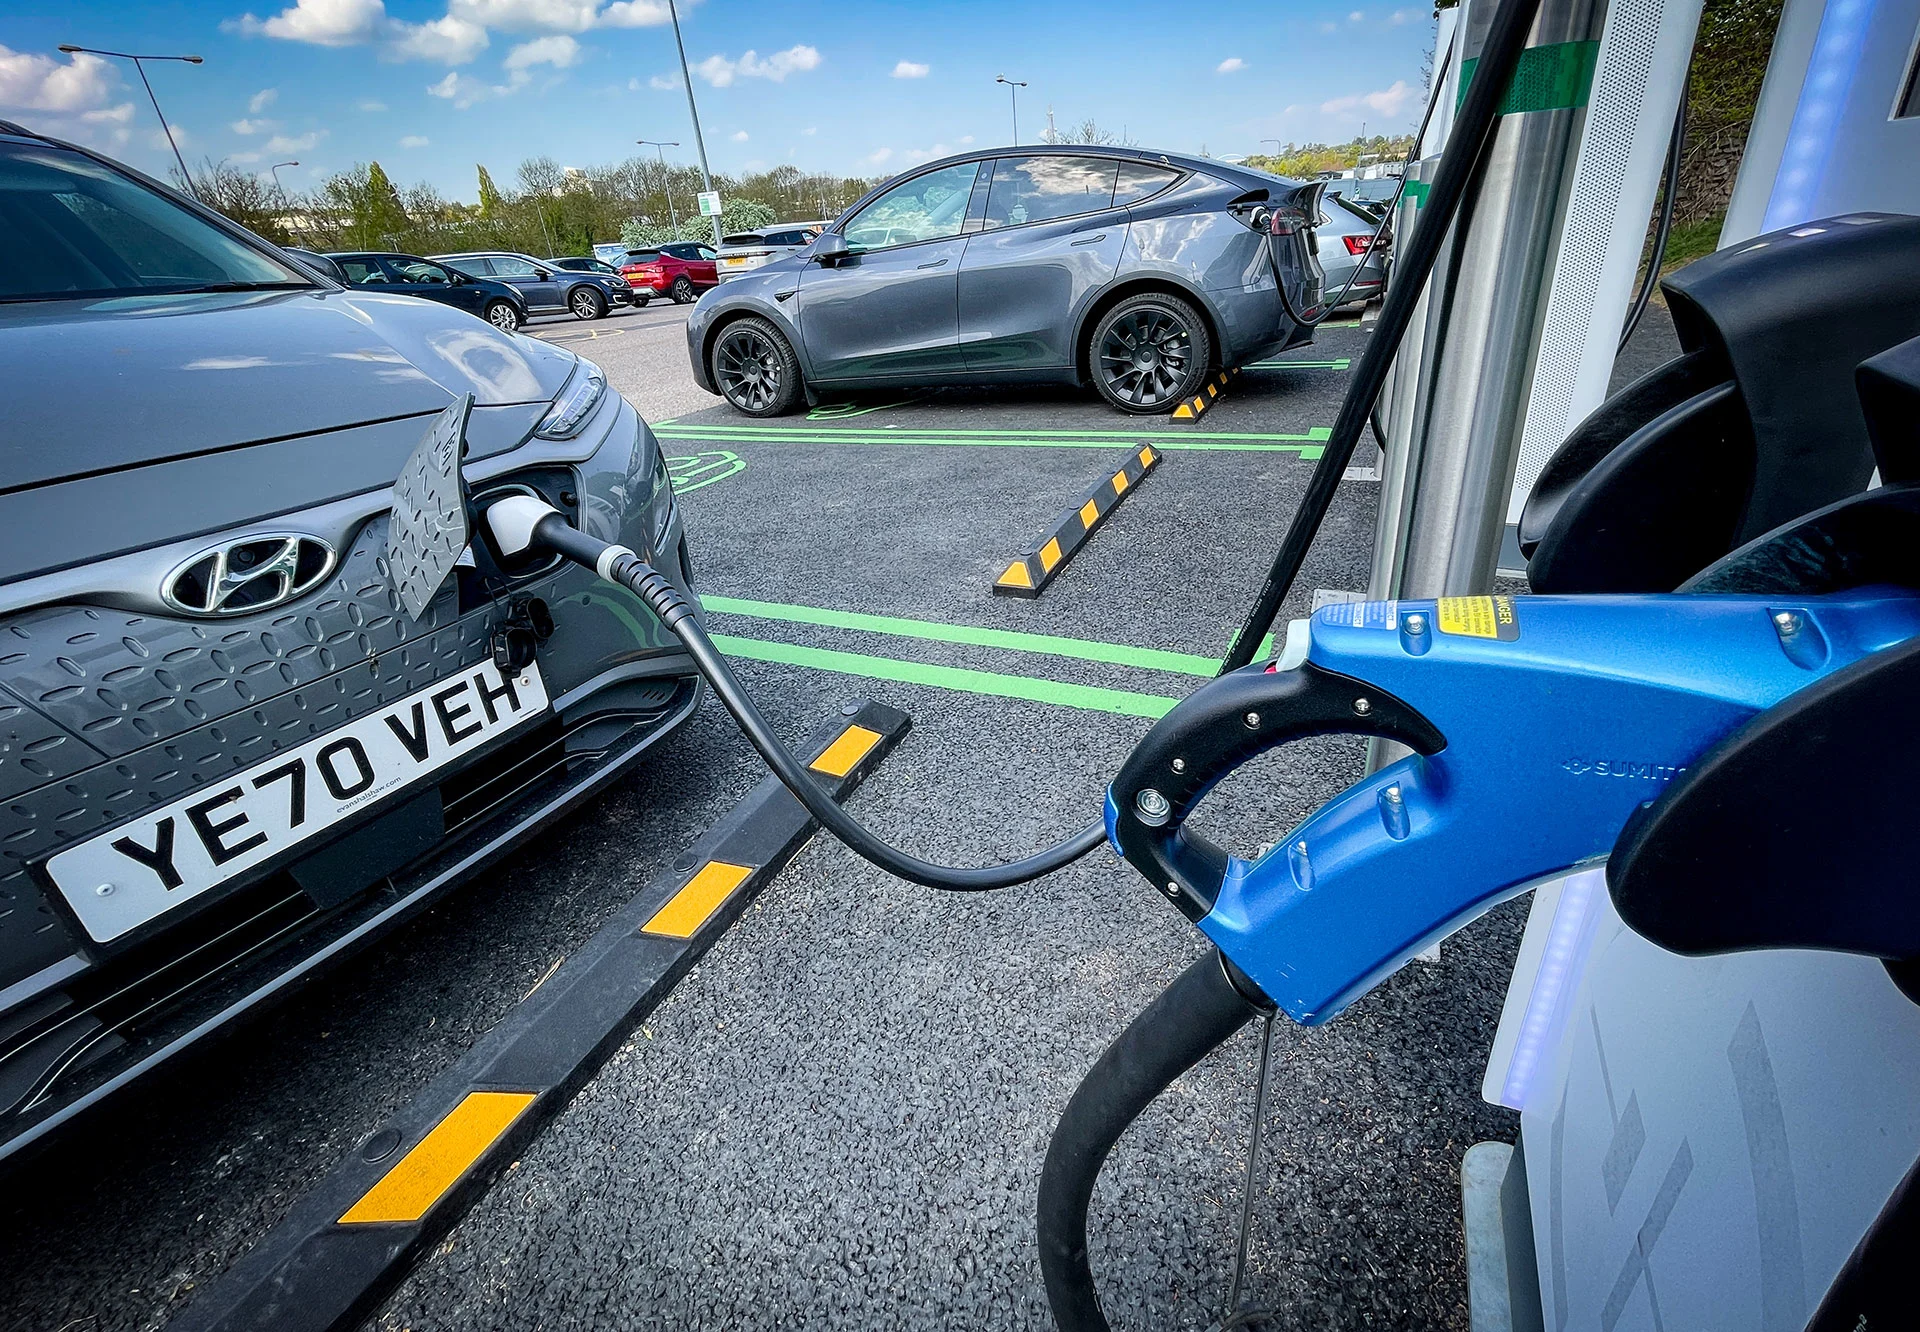 Electric cars at a motorway service station are charged by a bank of electrical chargers on April 24, 2022 in Exeter, England. The government's commitment to reducing future Co2 carbon emissions will mean many more motorists will need to switch from petrol and diesel-powered cars to electric (EV) driven ones. However there are fears that the charging network in the UK is not yet fit to deal with the enormous demand more EVs on the road would place on it. (Matt Cardy/ Getty Images)